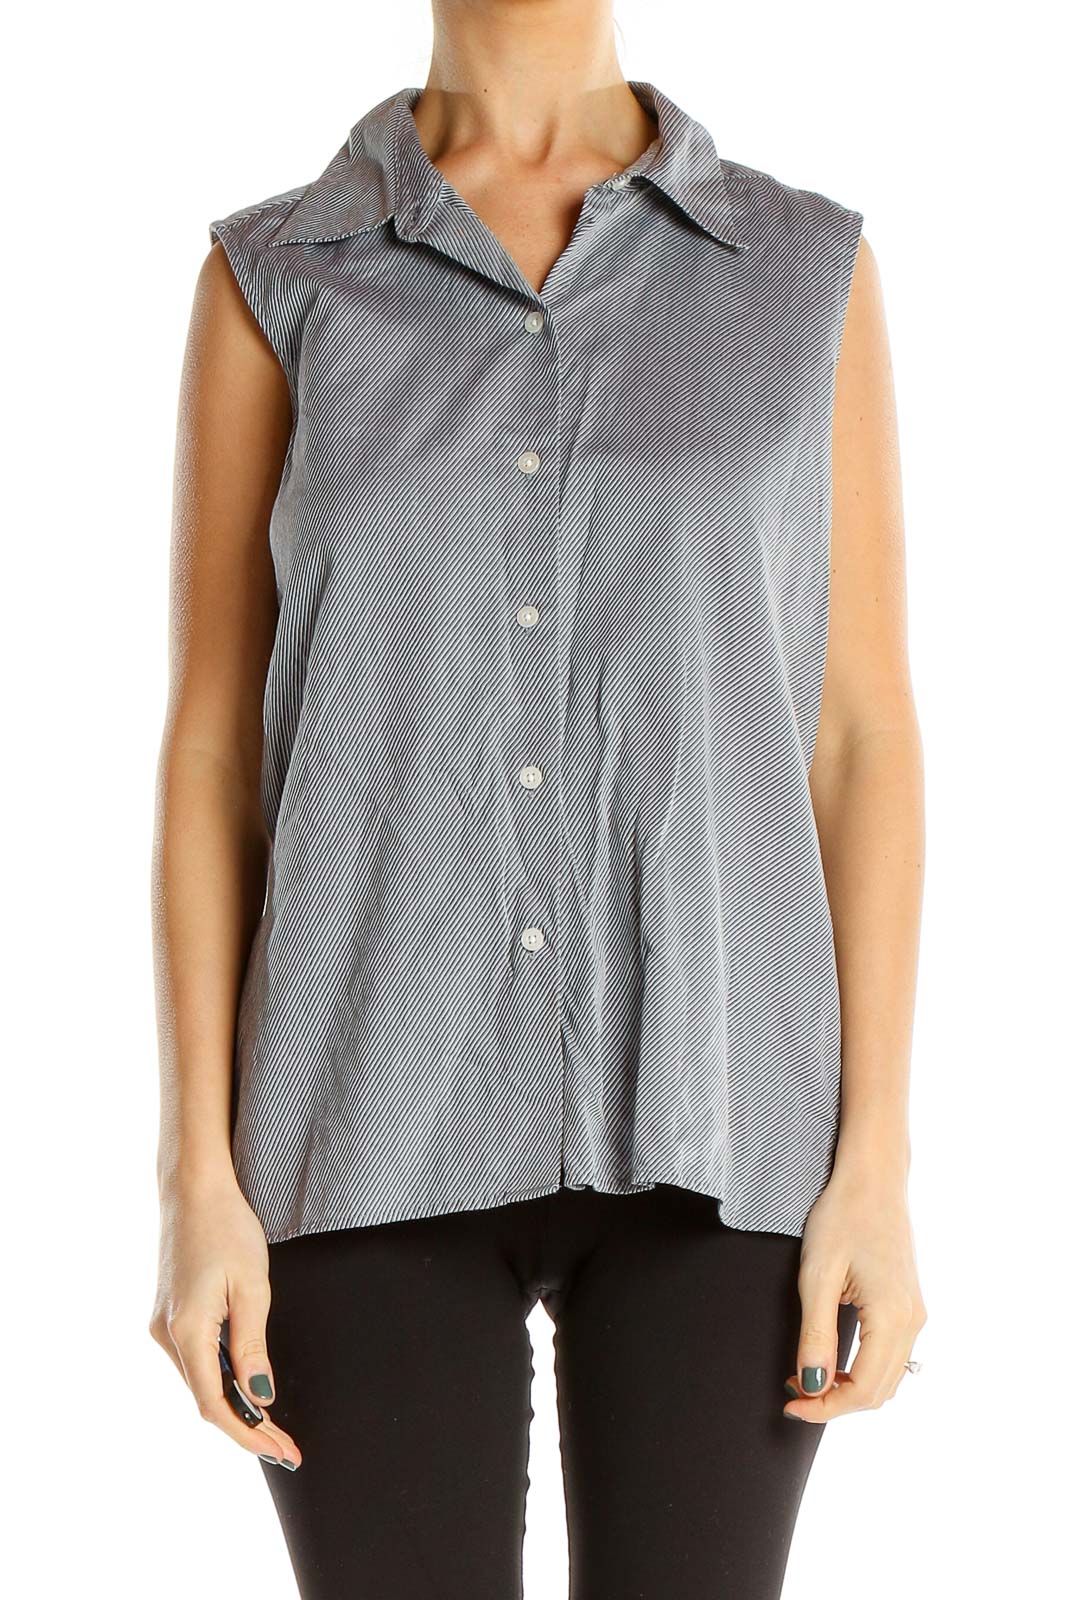 Gray Striped Formal Sleeveless Top Front